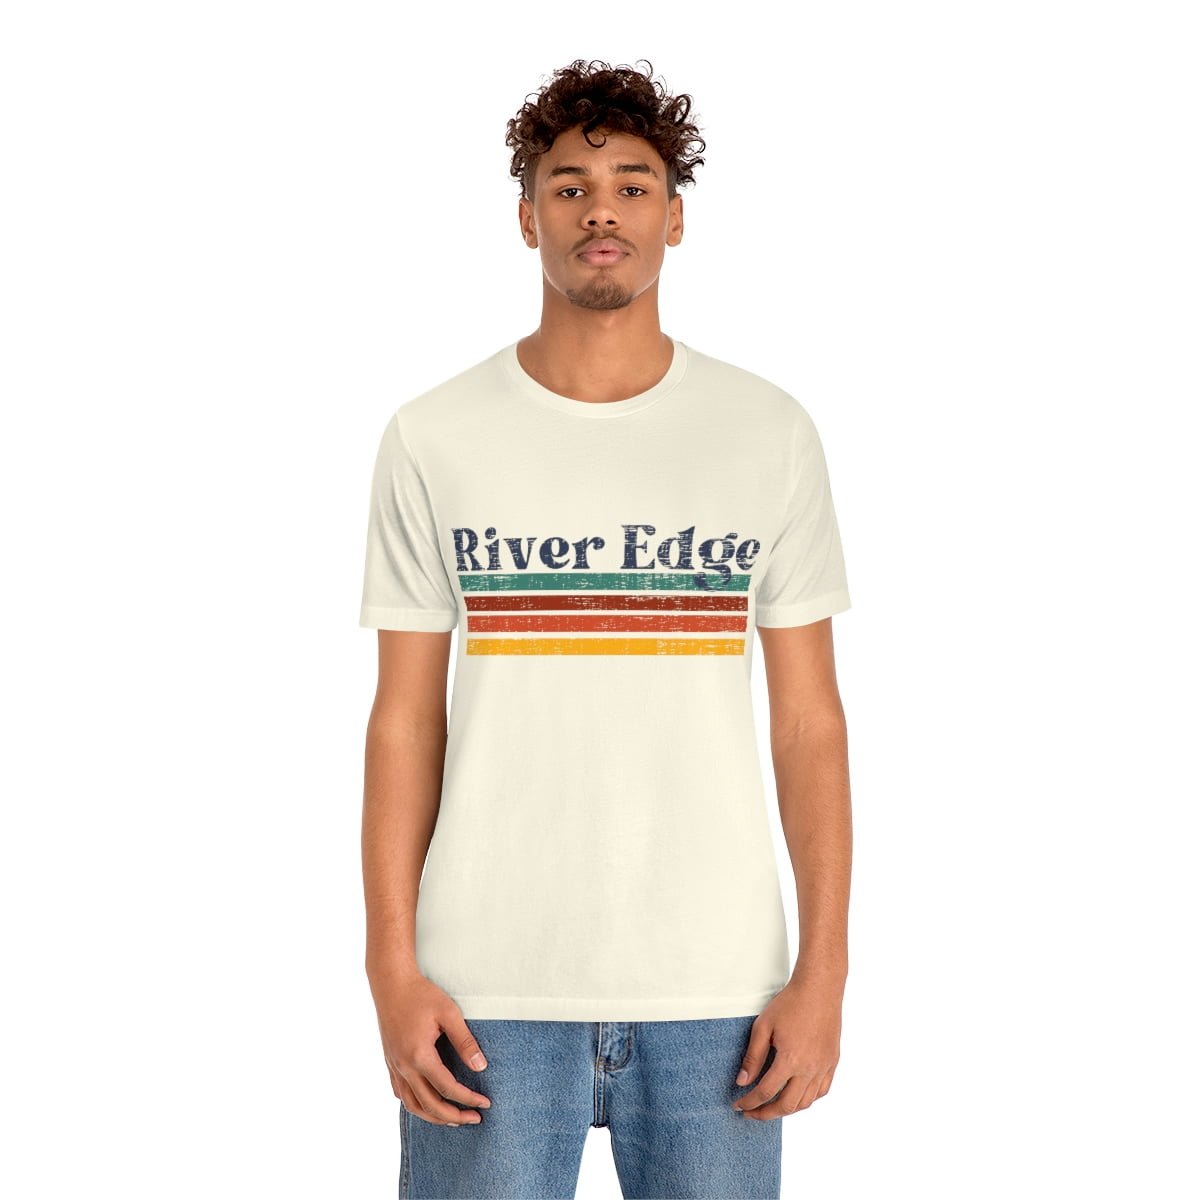 This is River Edge T Shirt